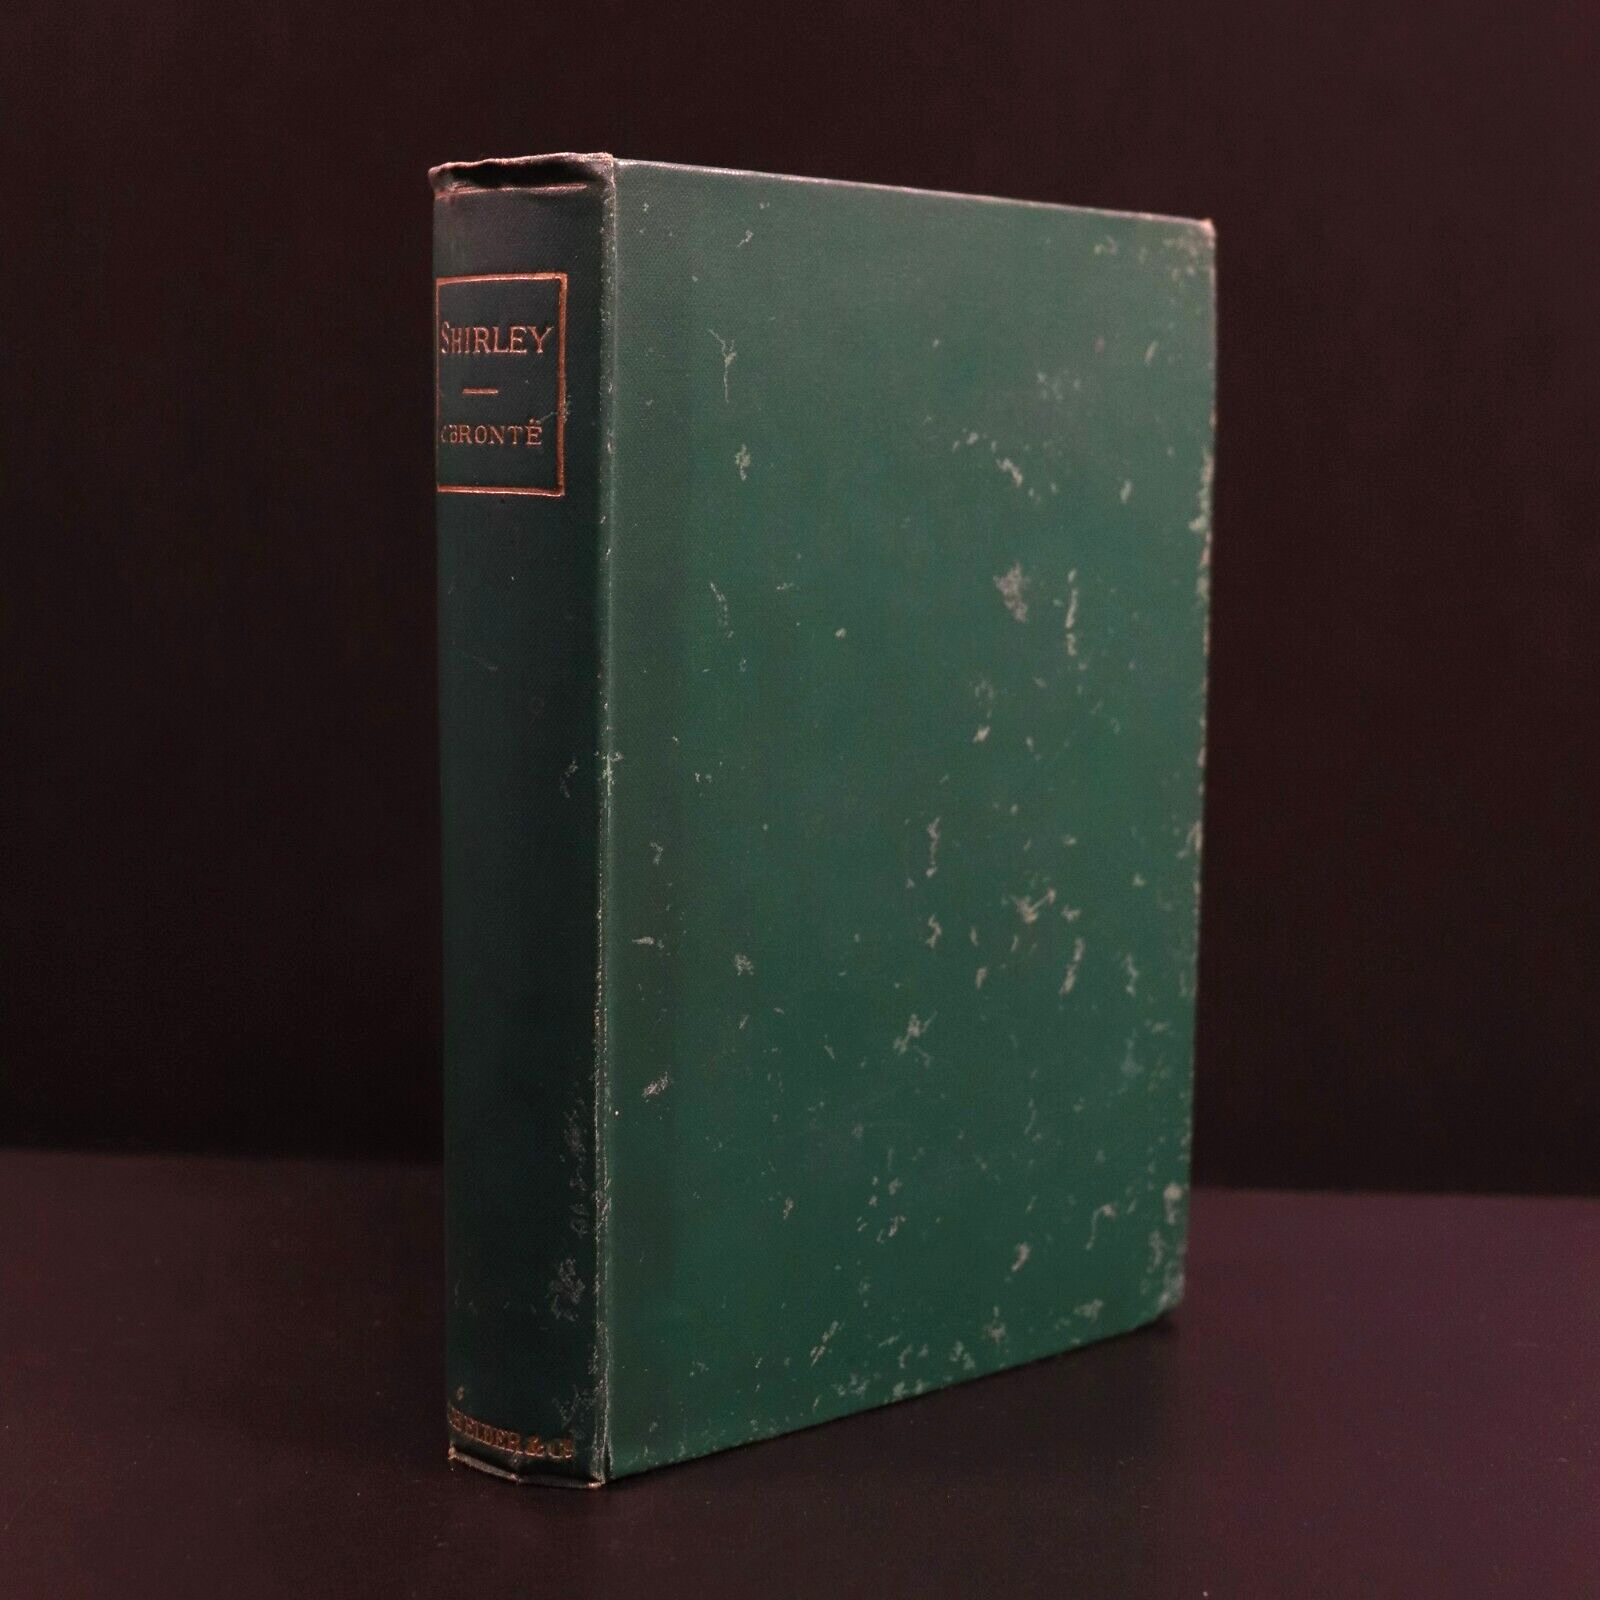 1894 Shirley: A Tale by Currer Bell Charlotte Bronte Classic Fiction Book